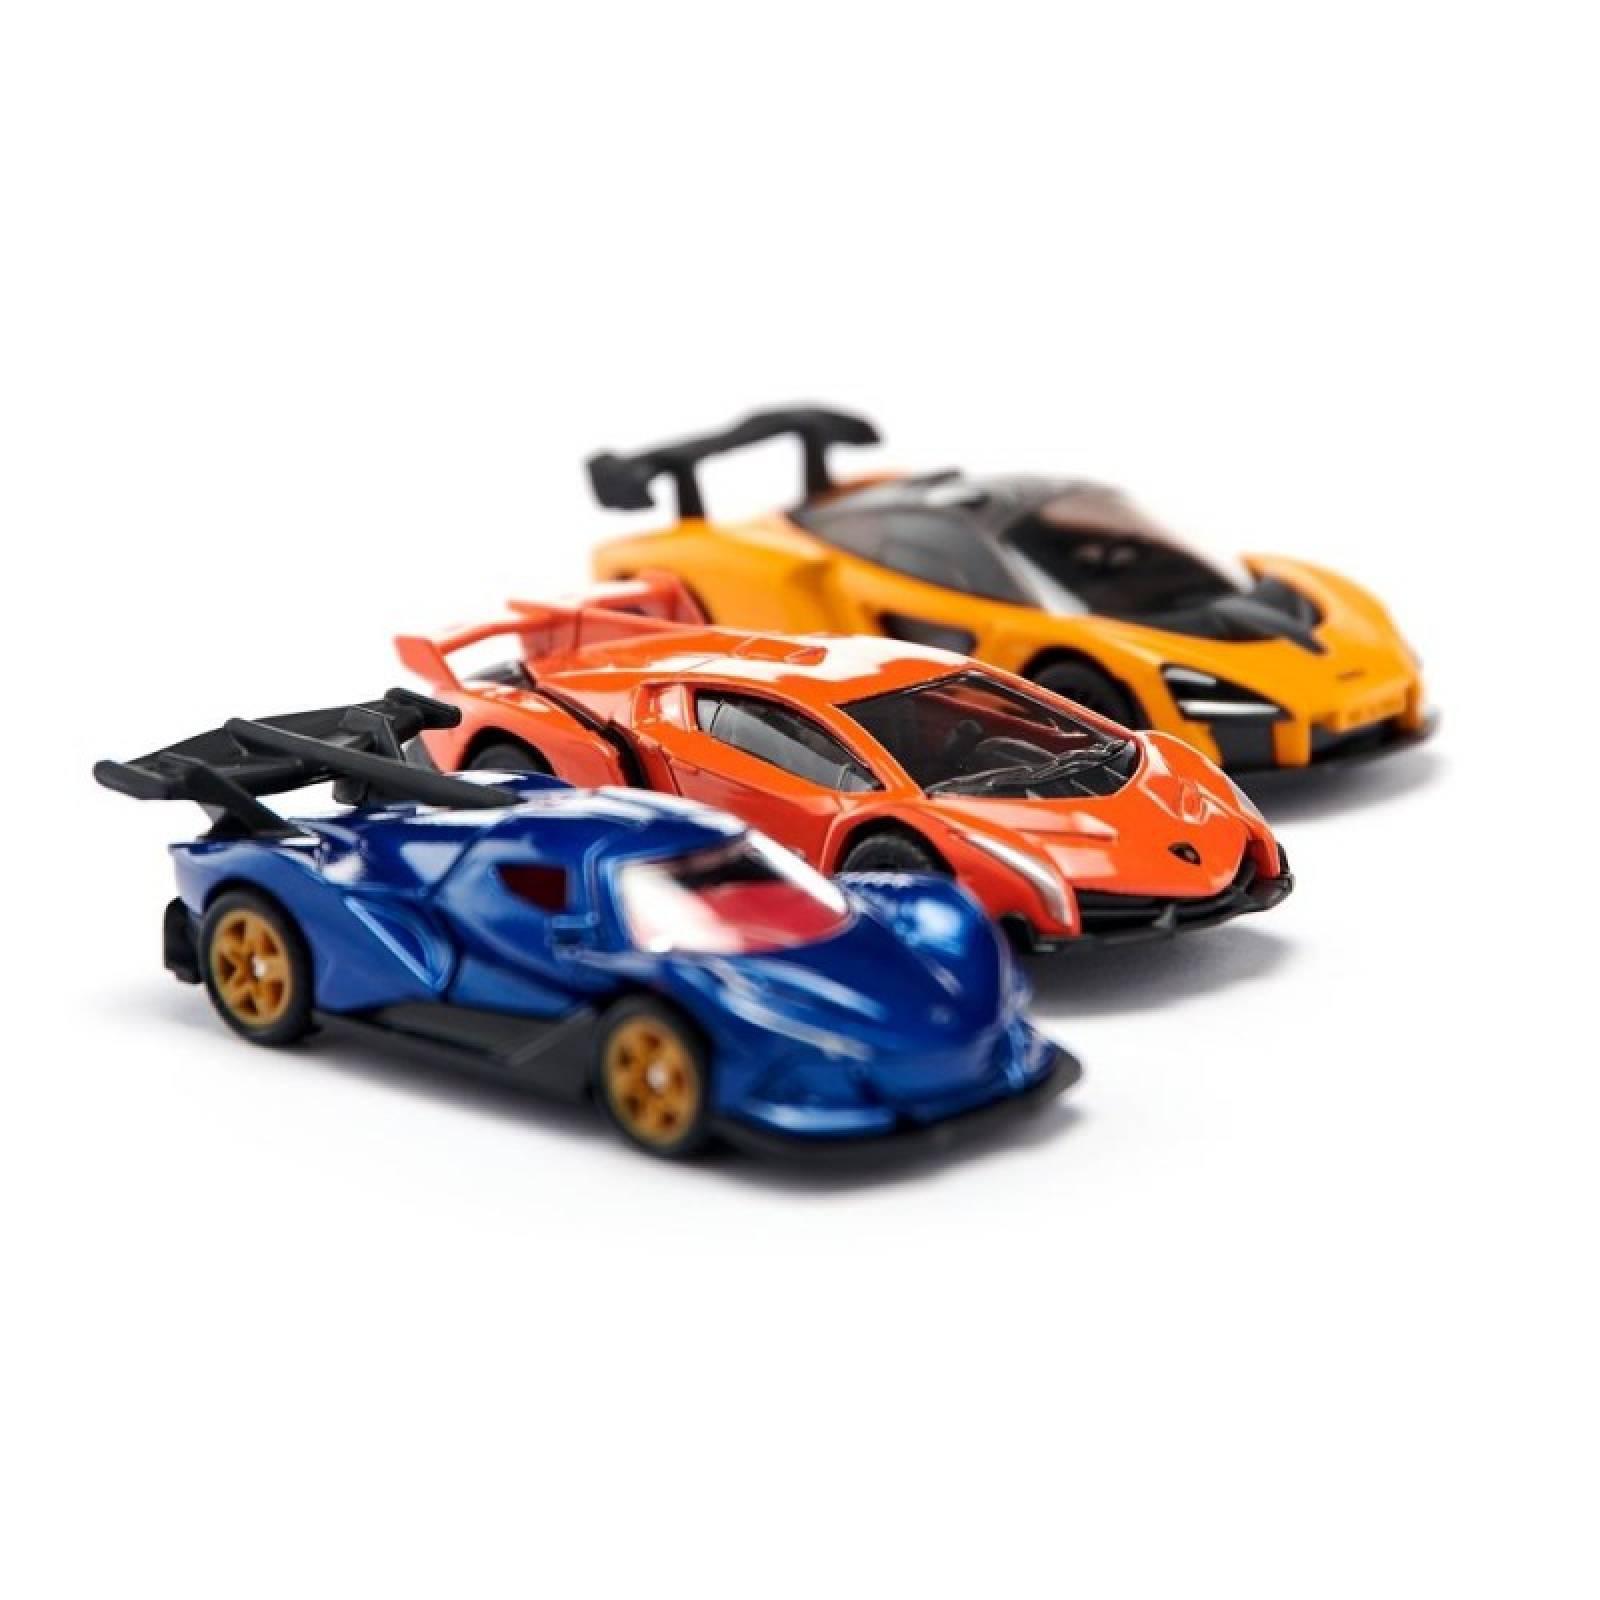 Supercars Gift Set - 3 x Single Die-Cast Toy Vehicles 6328 thumbnails